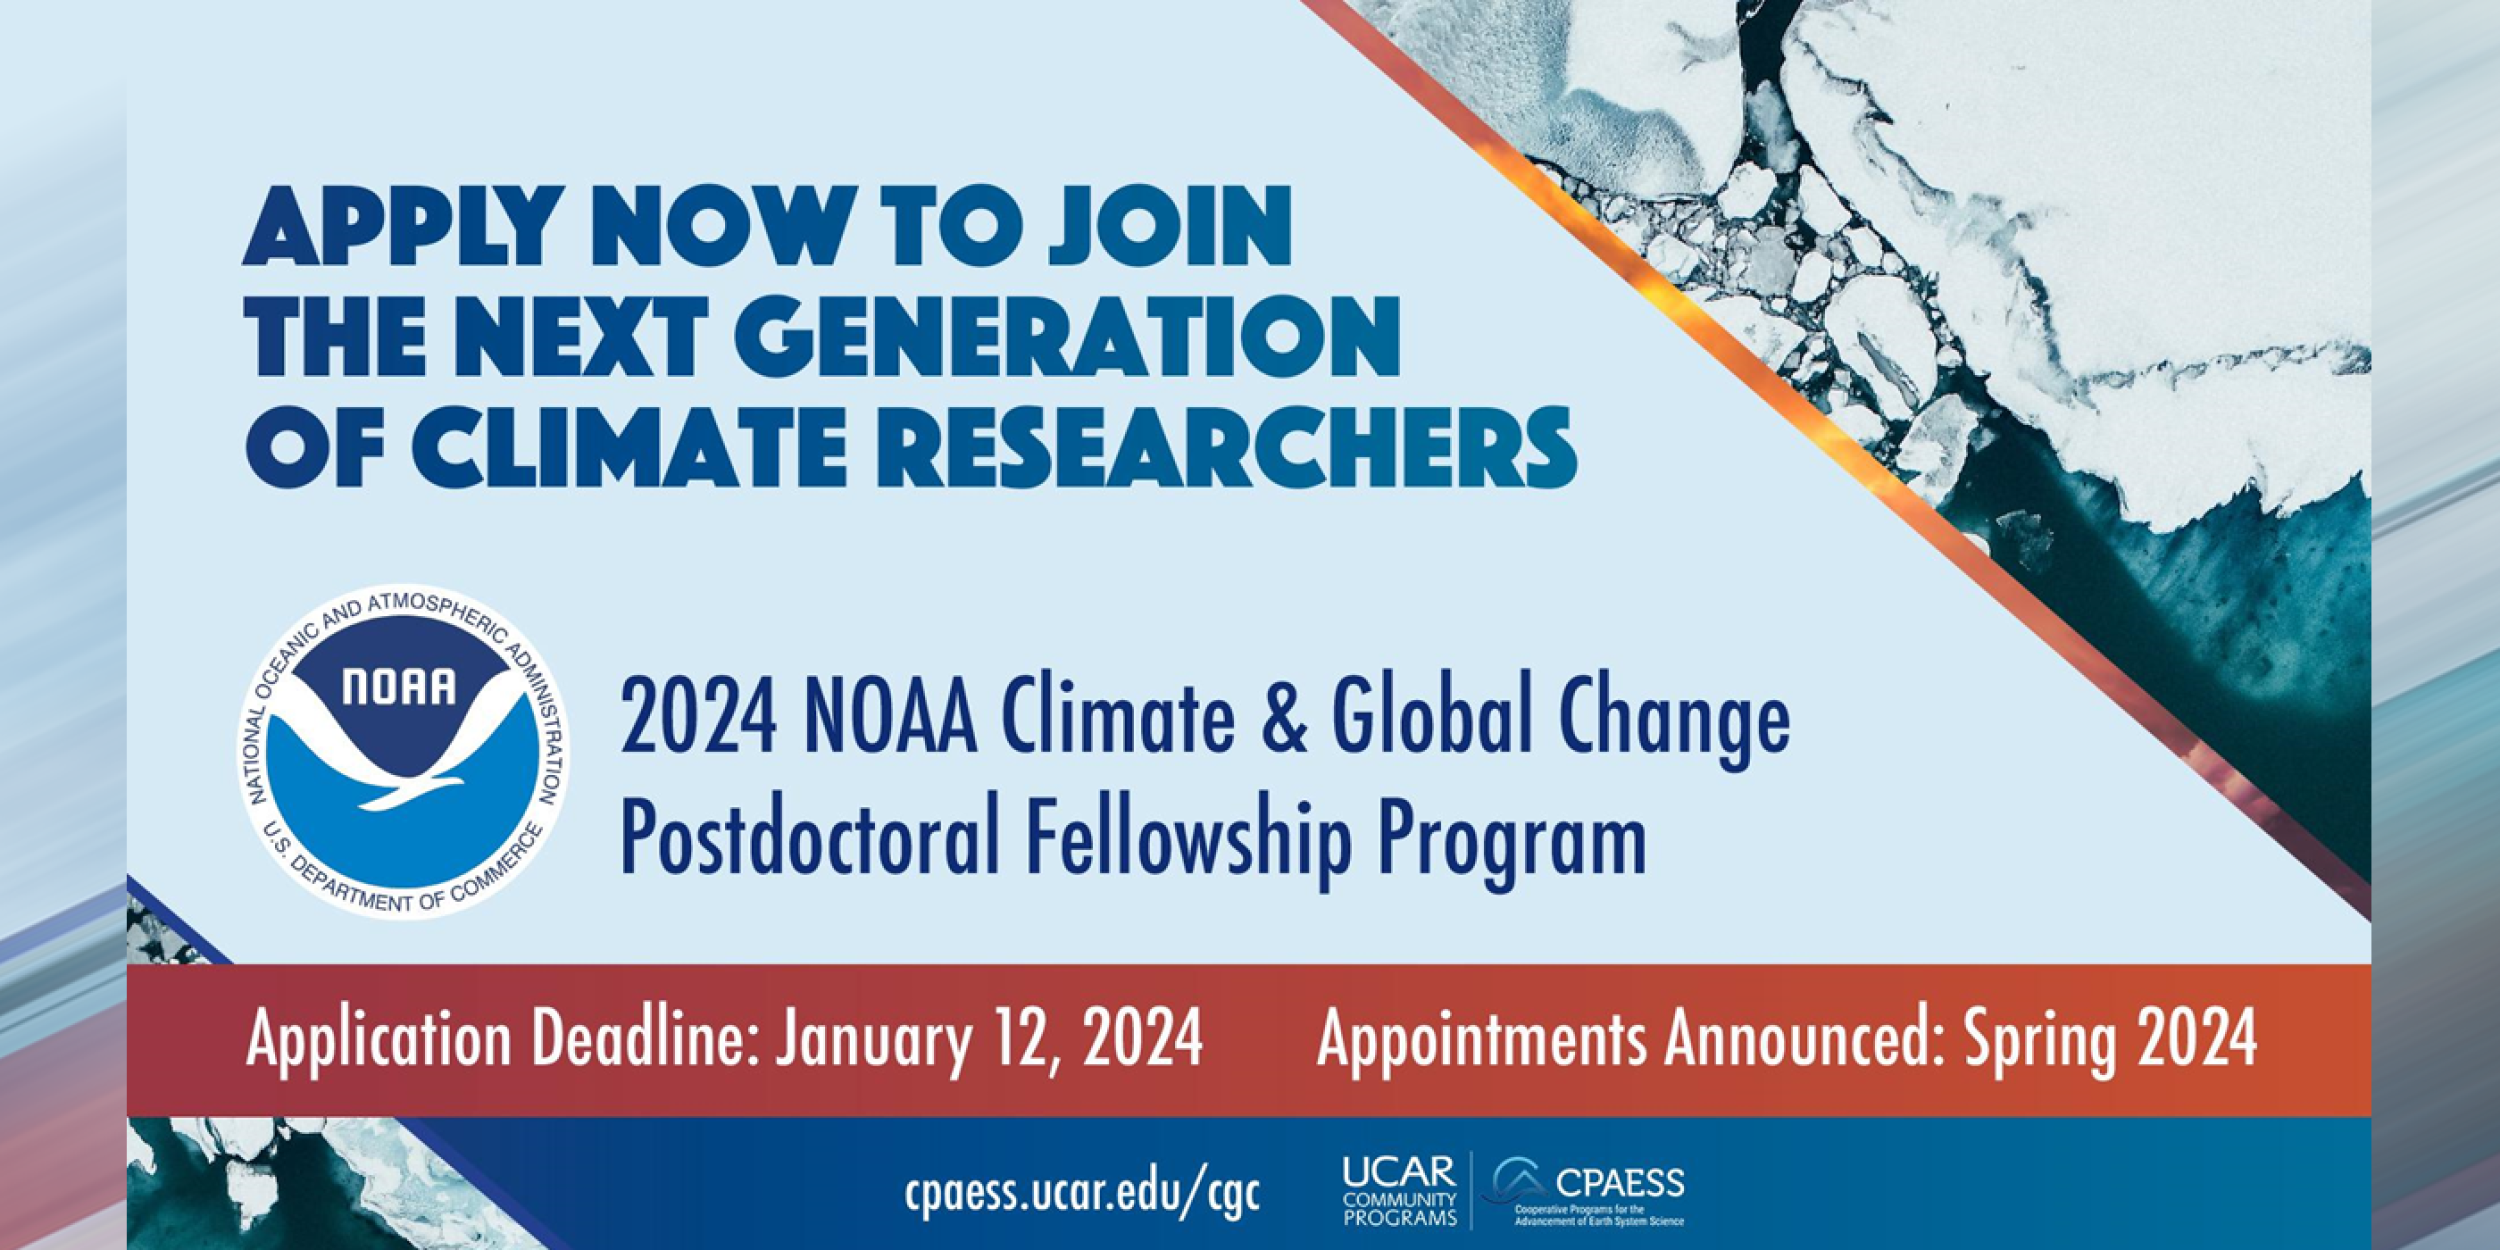 Apply now to join the next generation of climate researchers